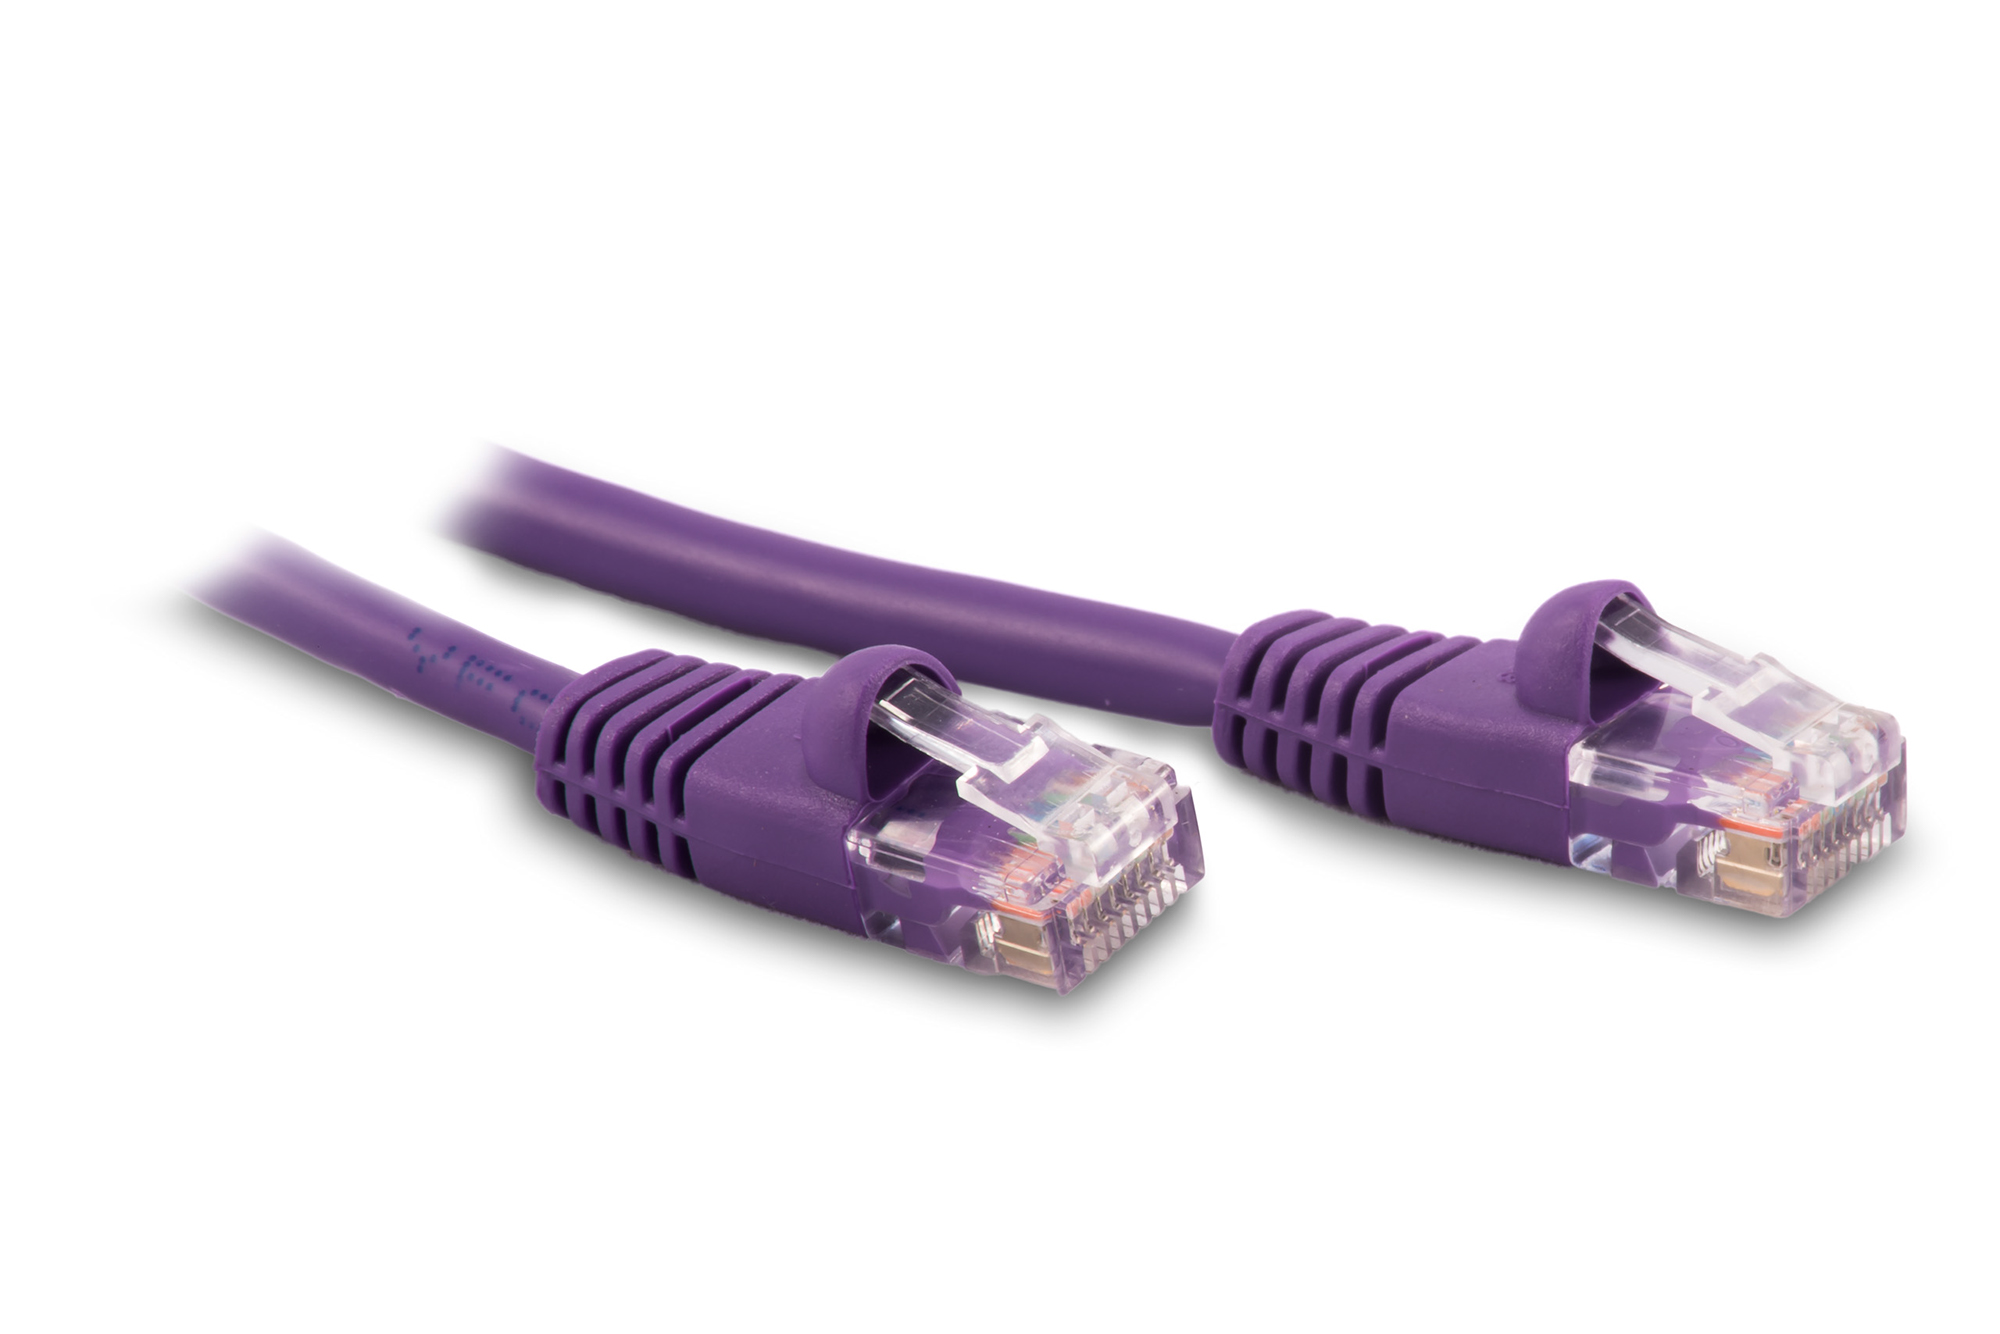 30ft Cat6 Ethernet Patch Cable - Violet Color - Snagless Boot